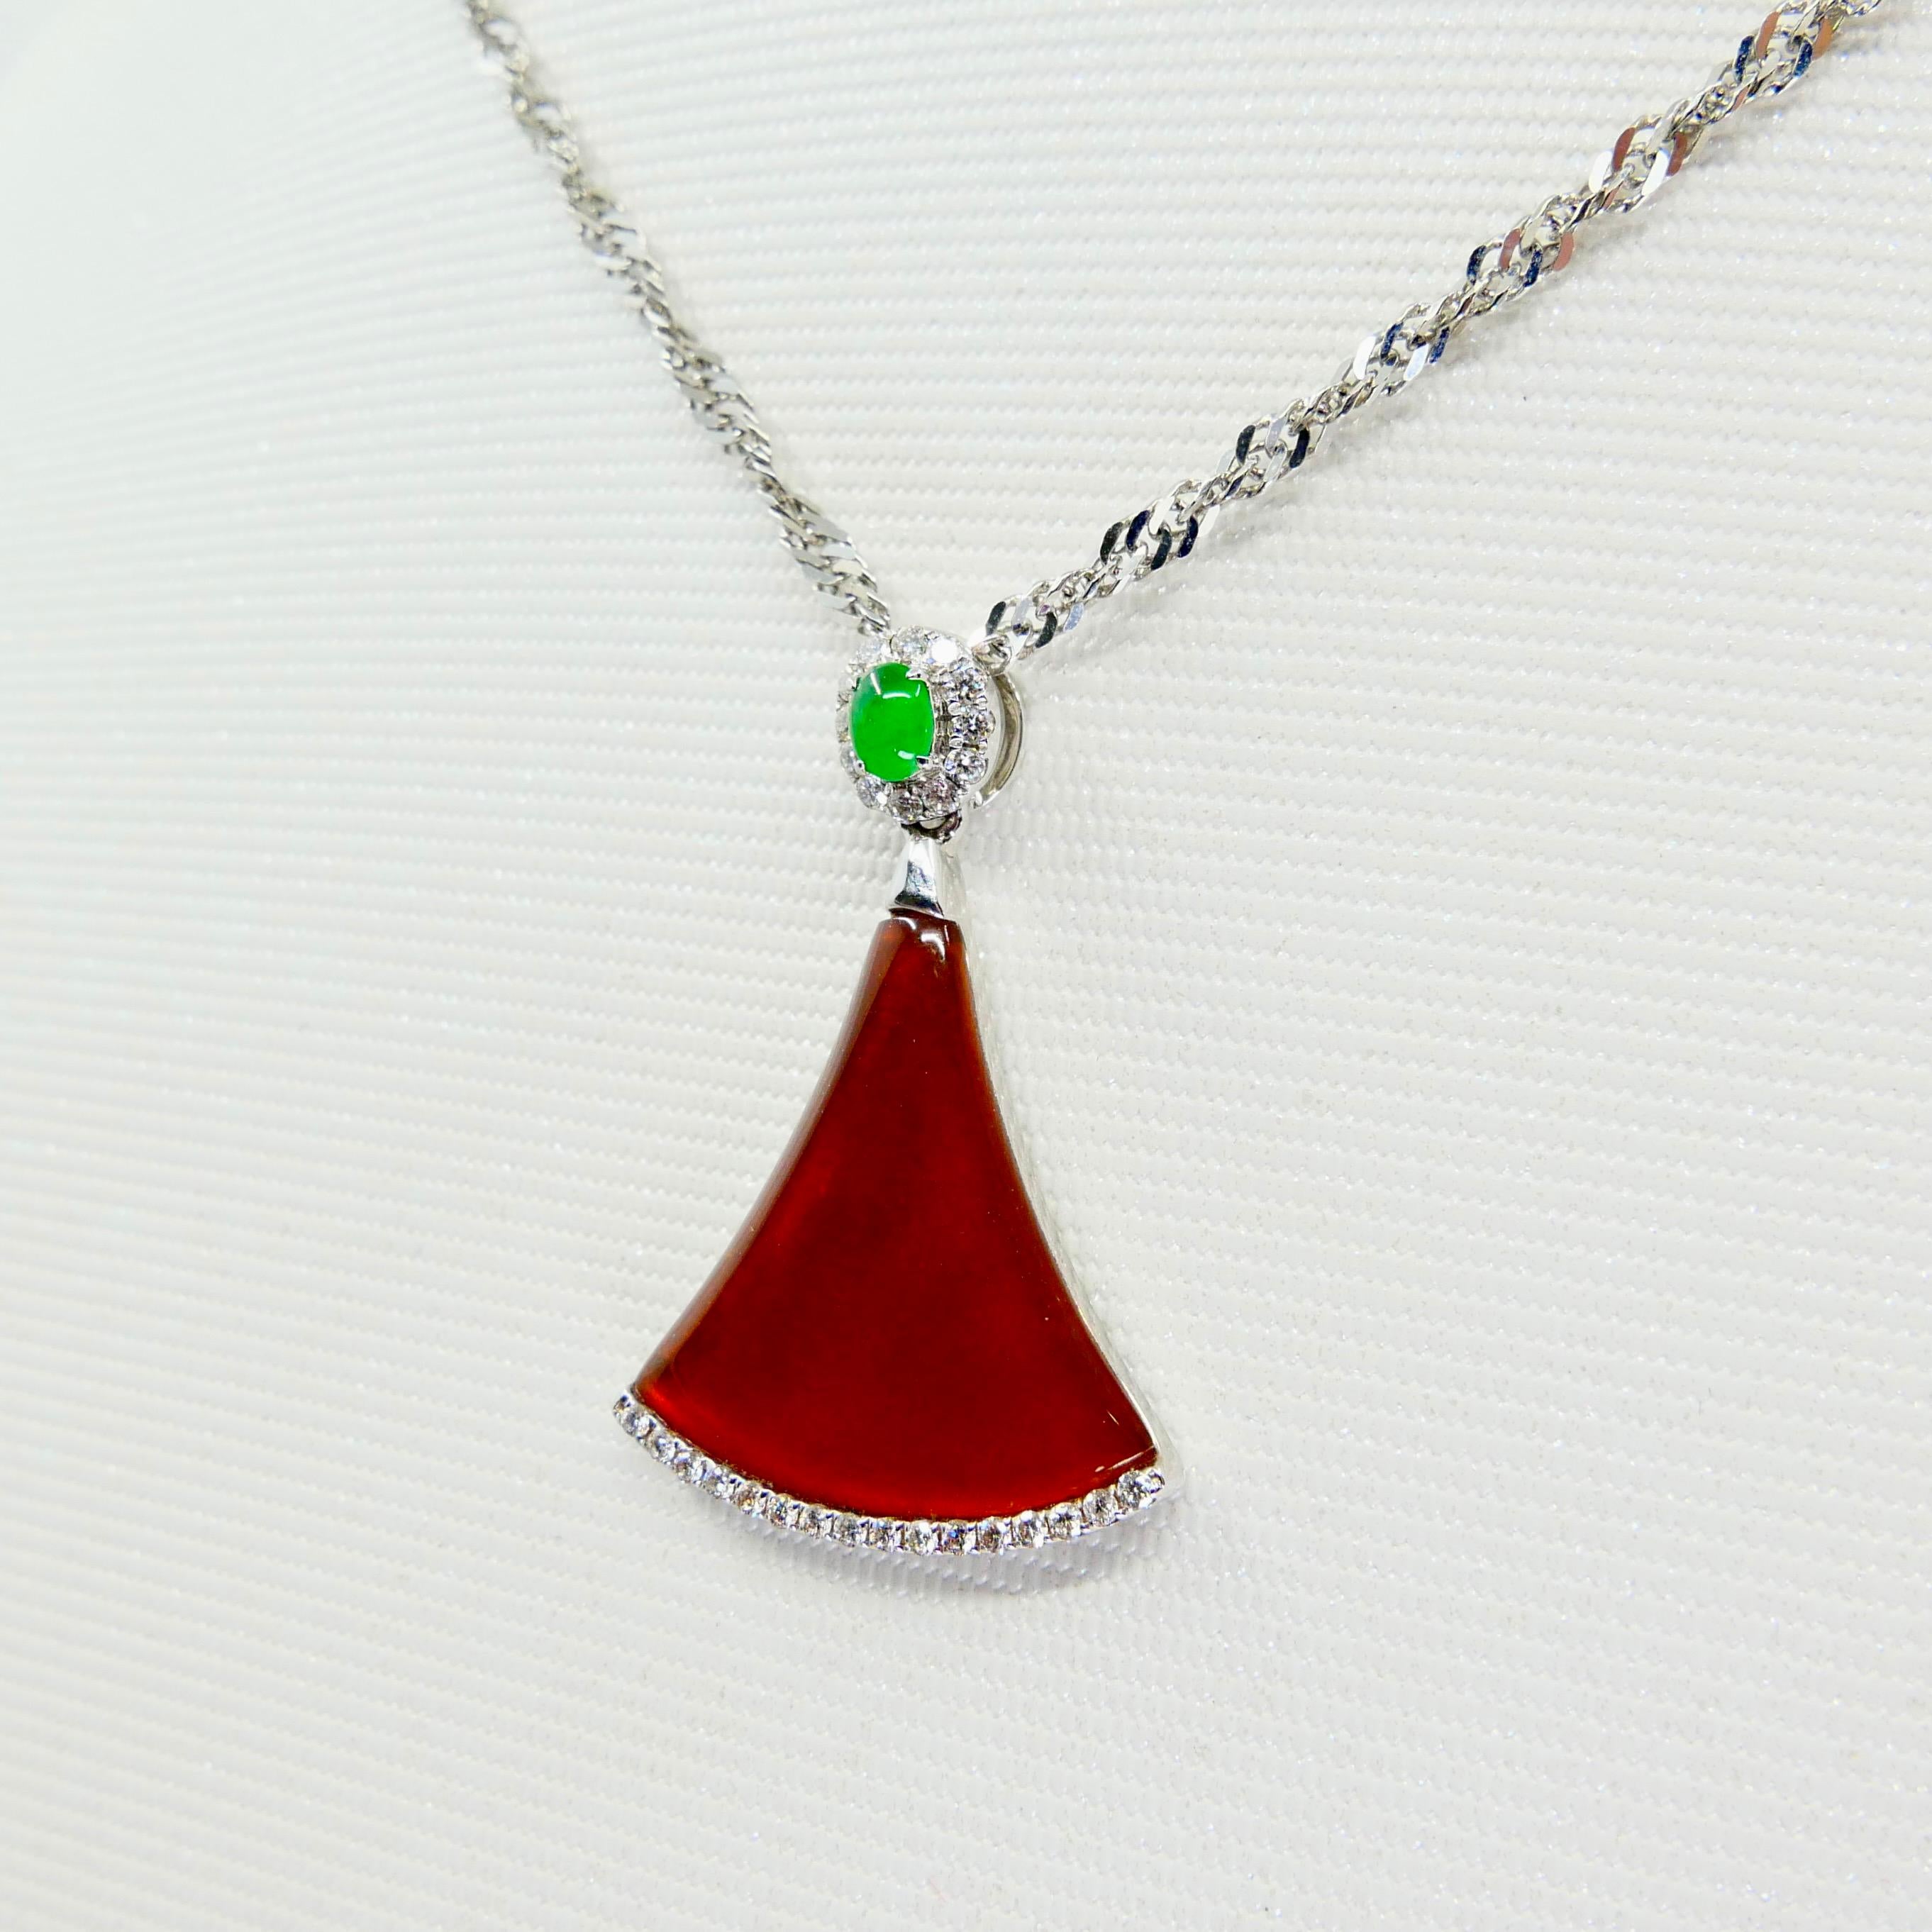 Women's Certified Natural Icy Apple Green, Icy Red Jade & Diamond Pendant Drop Necklace